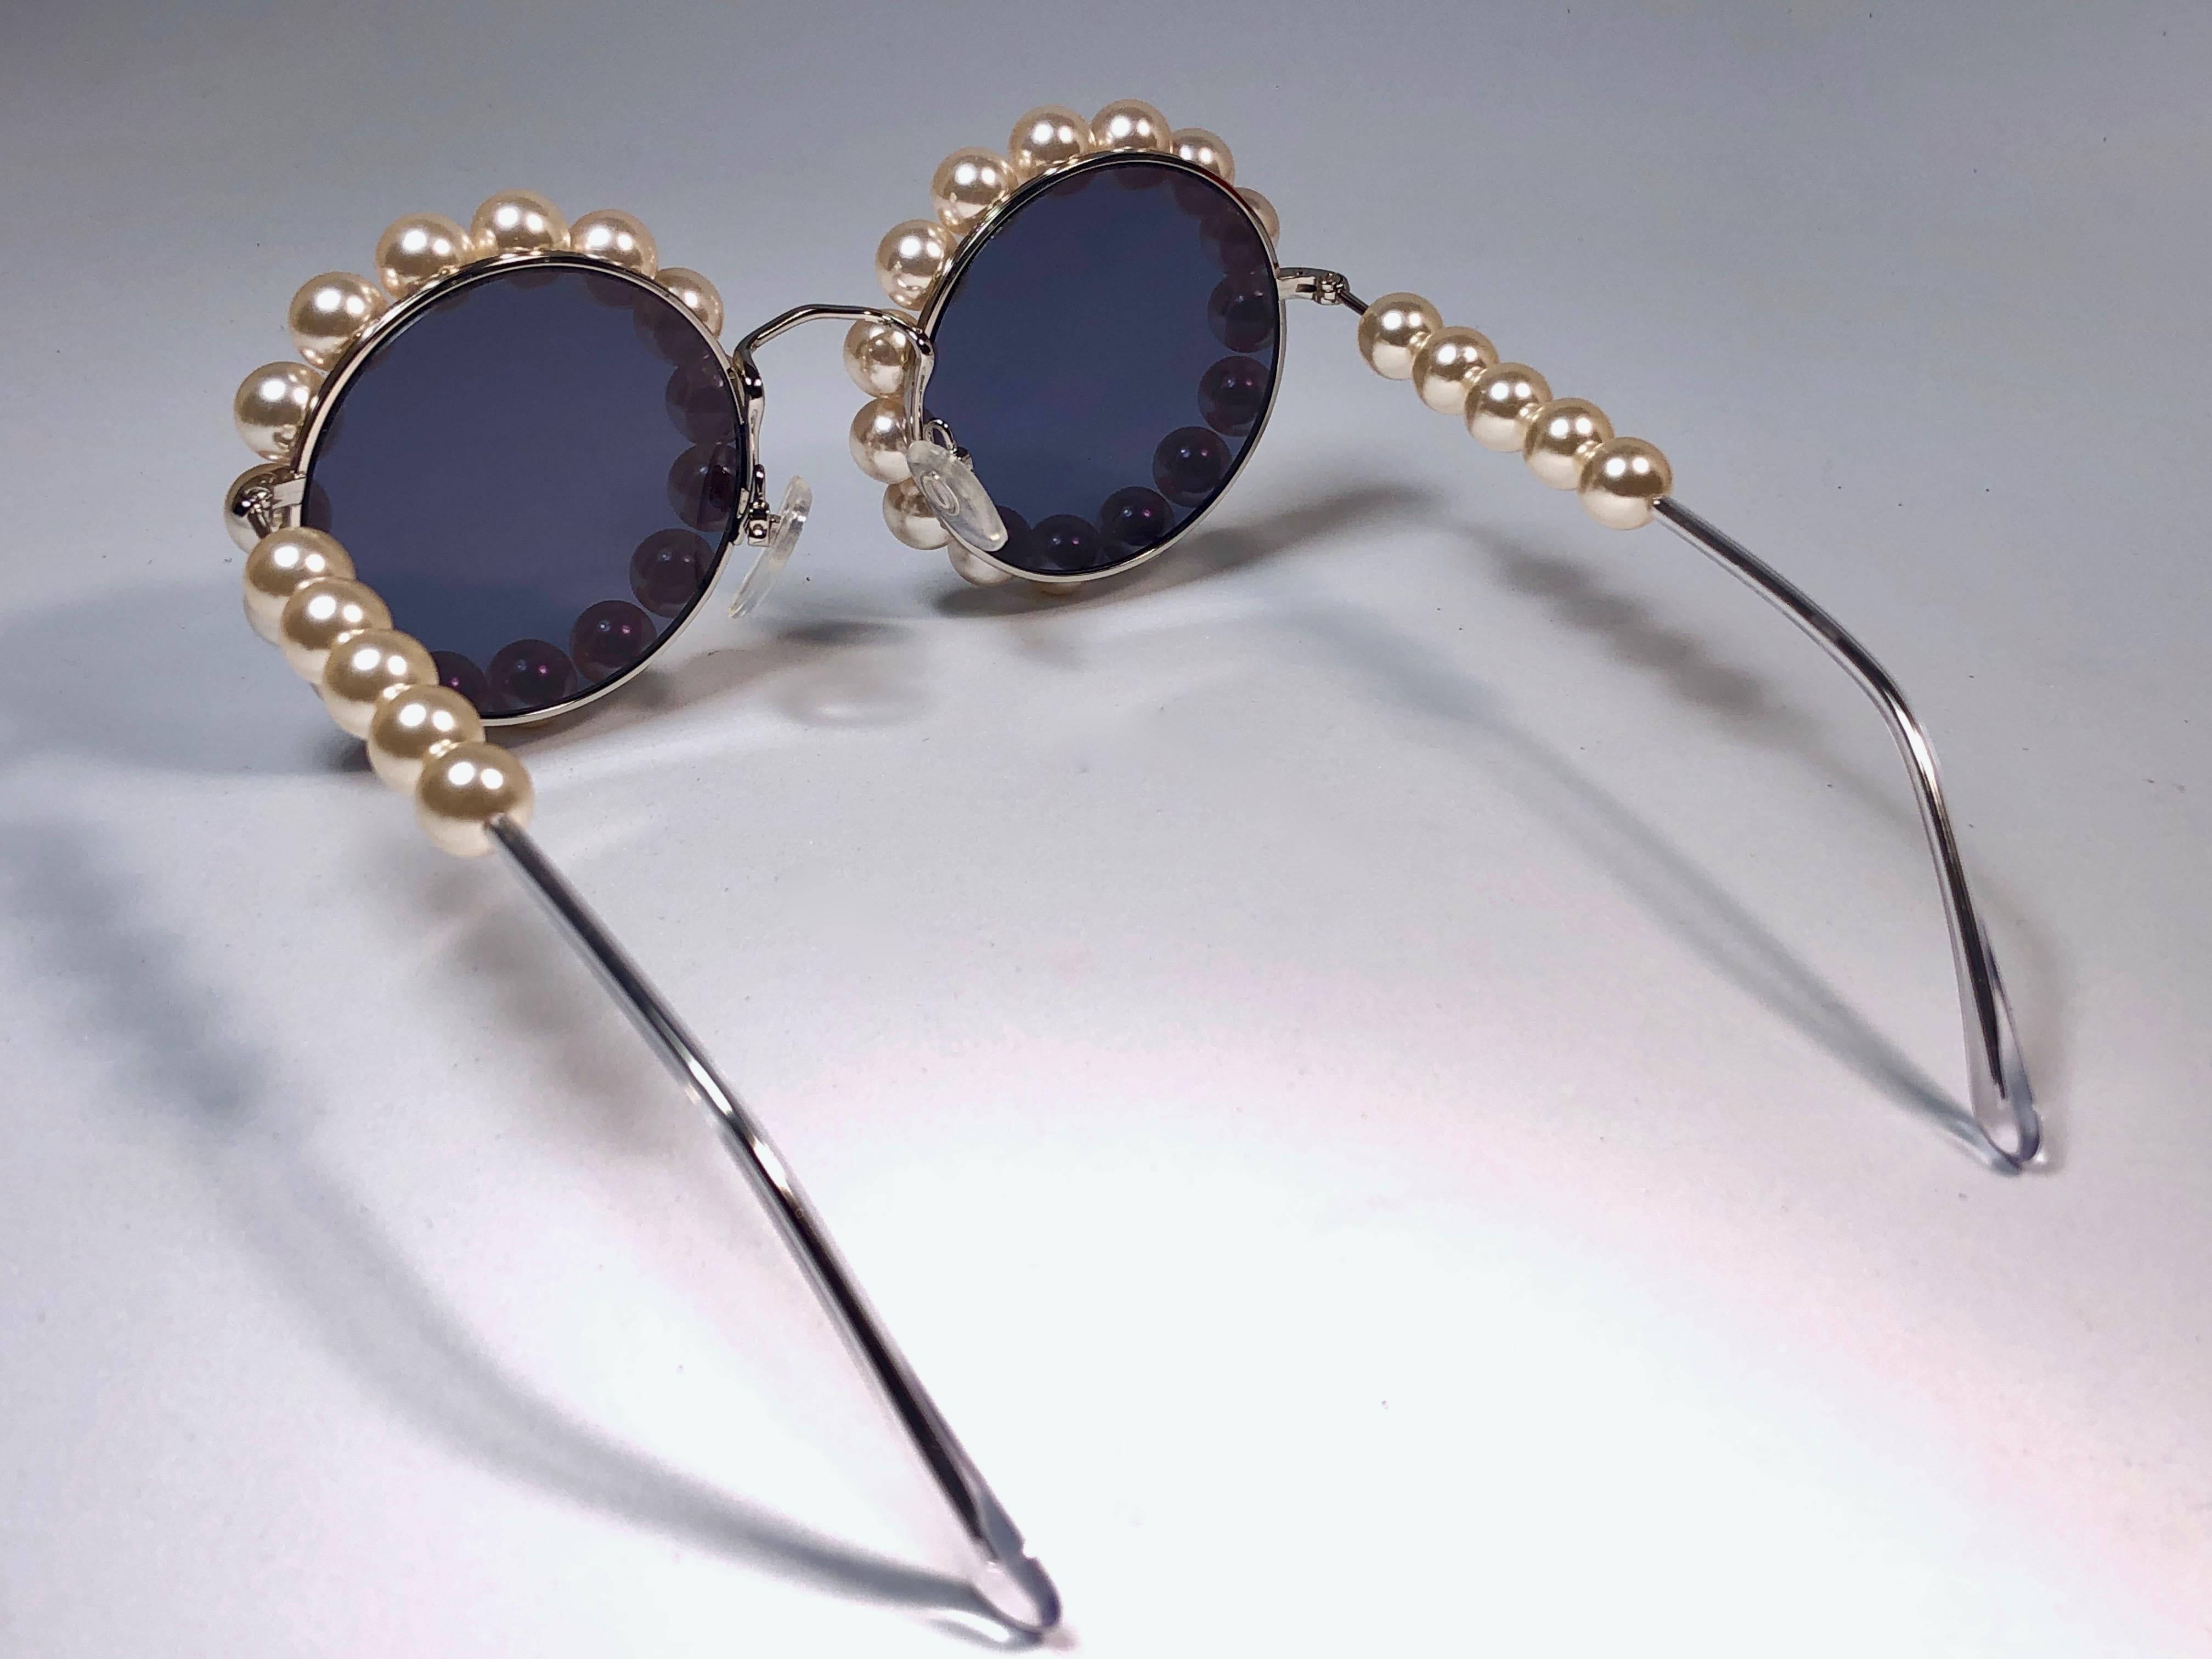 Chanel Vintage Runway Pearls Spring Summer 1994 Sunglasses Made In Italy For Sale 7